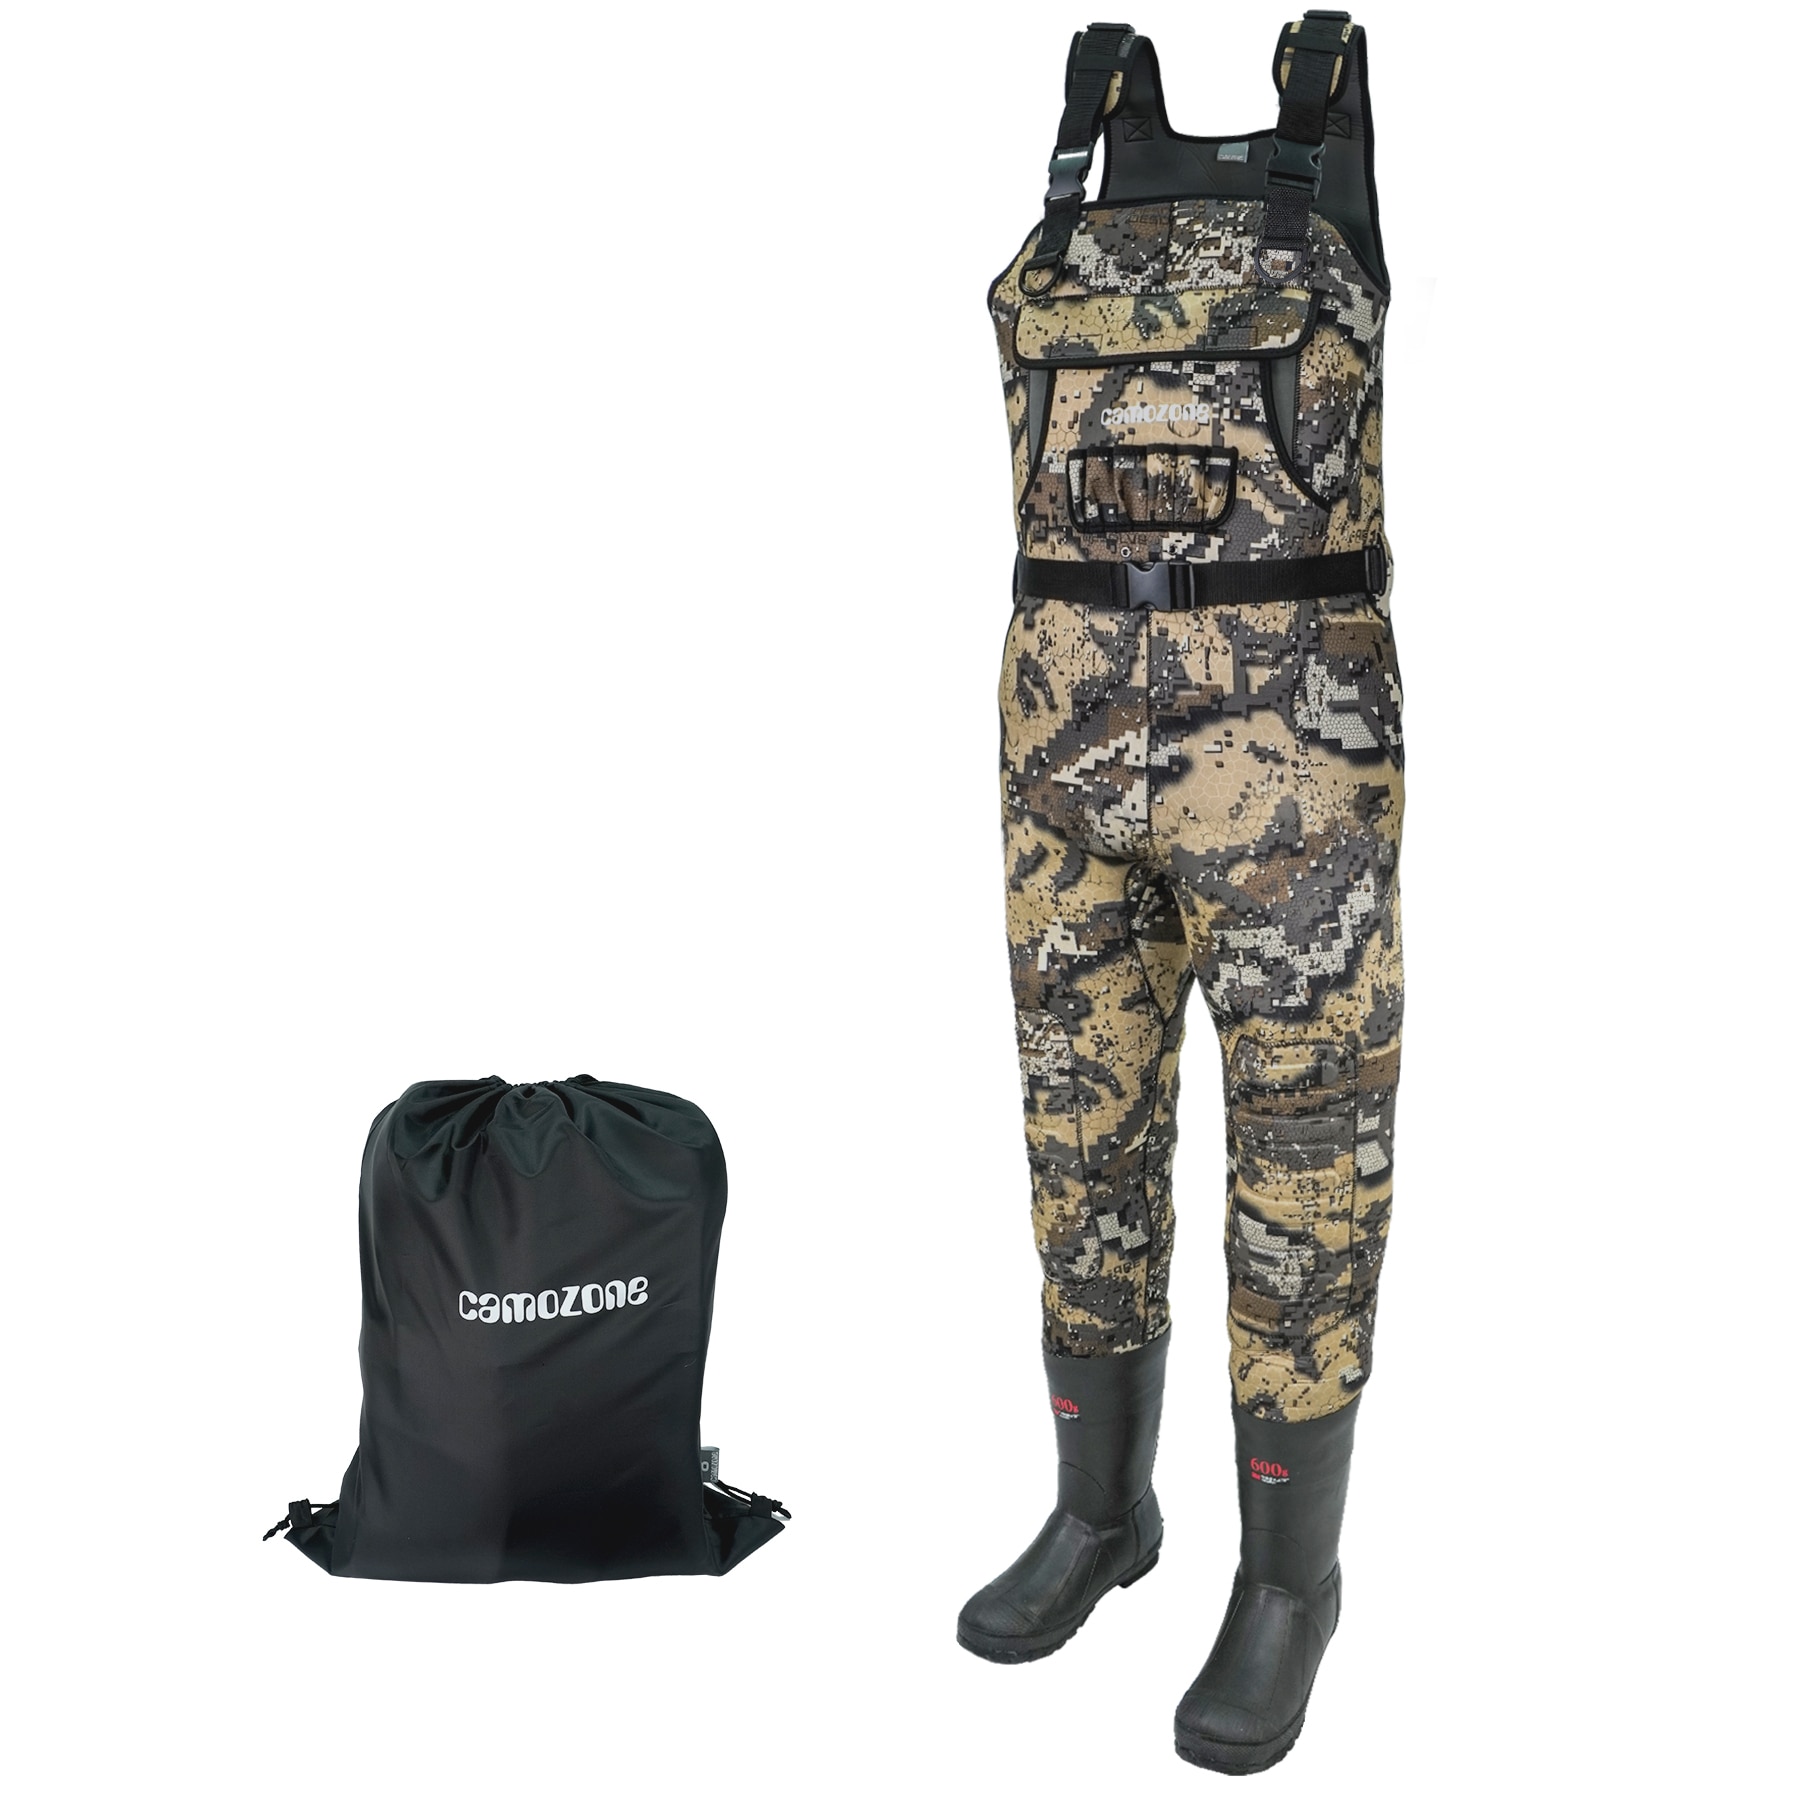 Neoprene Chest Waders with Boots-size14 Fishing Gear & Apparel at